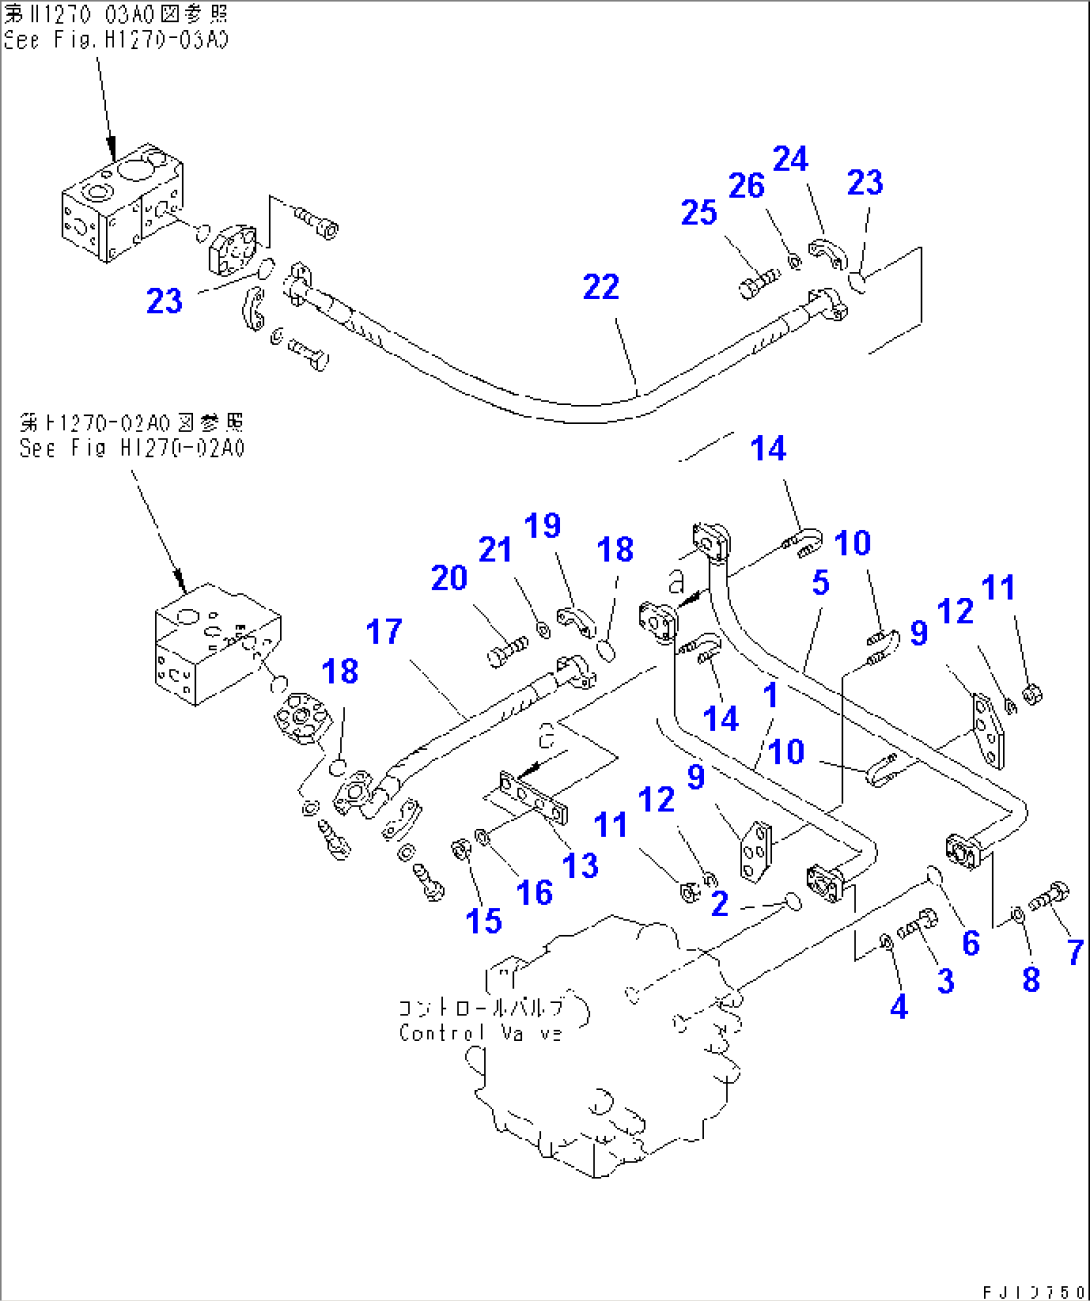 ADDITIONAL PIPING (CONTROL VALVE TO CHANGE ROTOR)